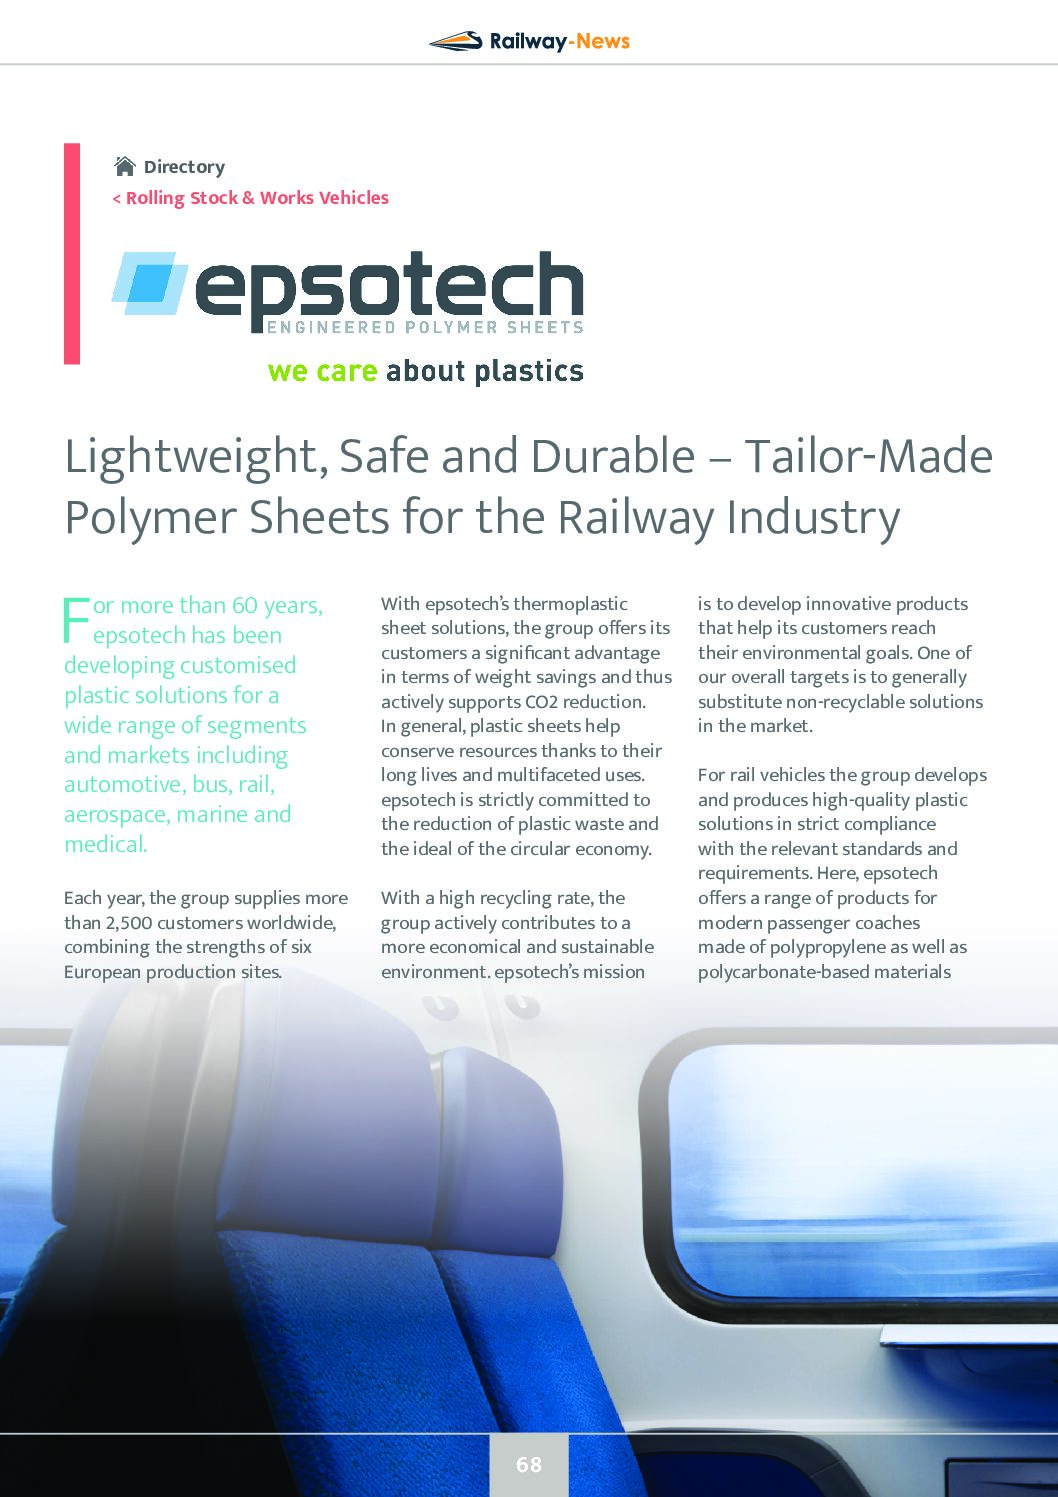 Tailor-Made Polymer Sheets for the Railway Industry